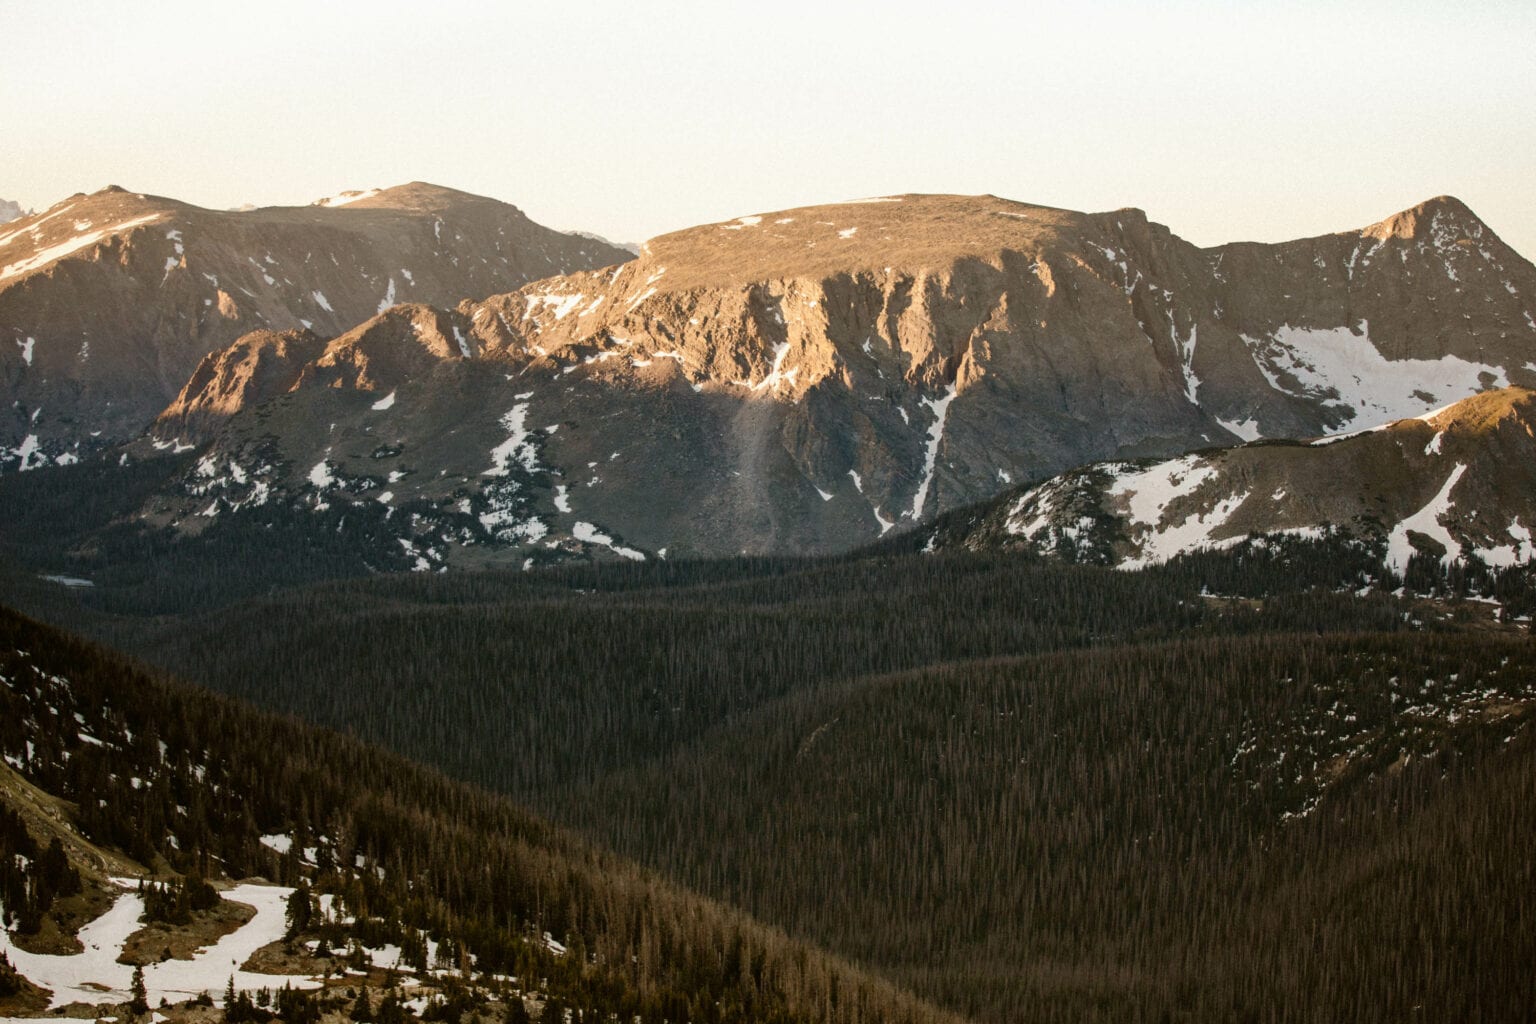 alpenglow on the mountains seen from the Gore Range Overlook on Trail Ridge Road Colorado